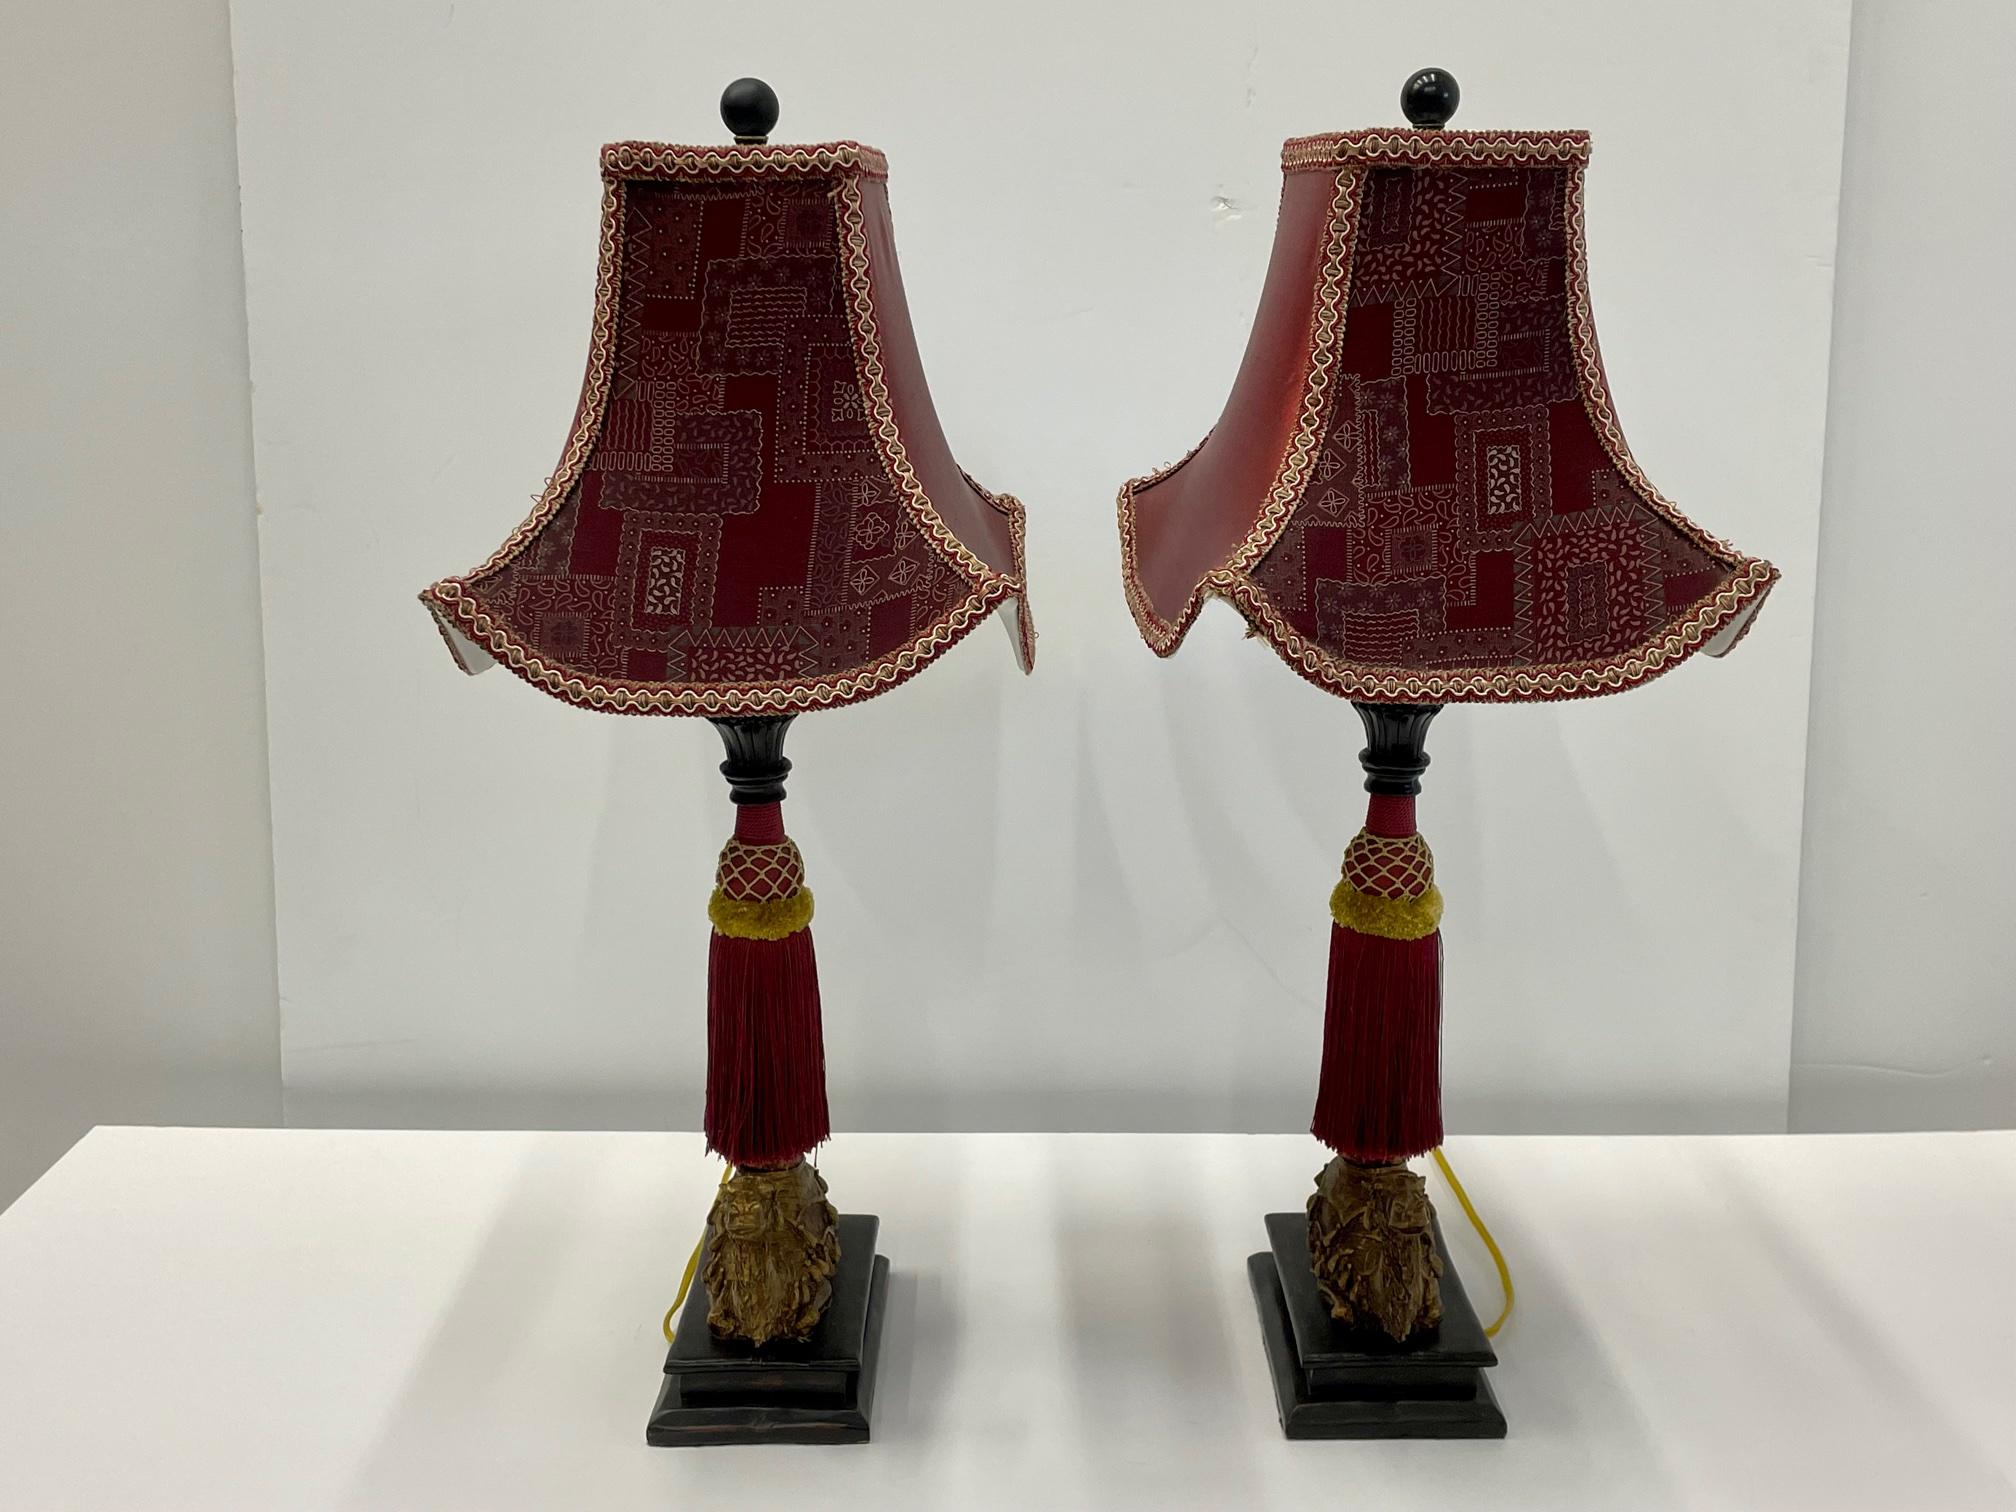 American Dramatic Pair of Cast Resin Red Gold & Black Fancy Camel Lamps